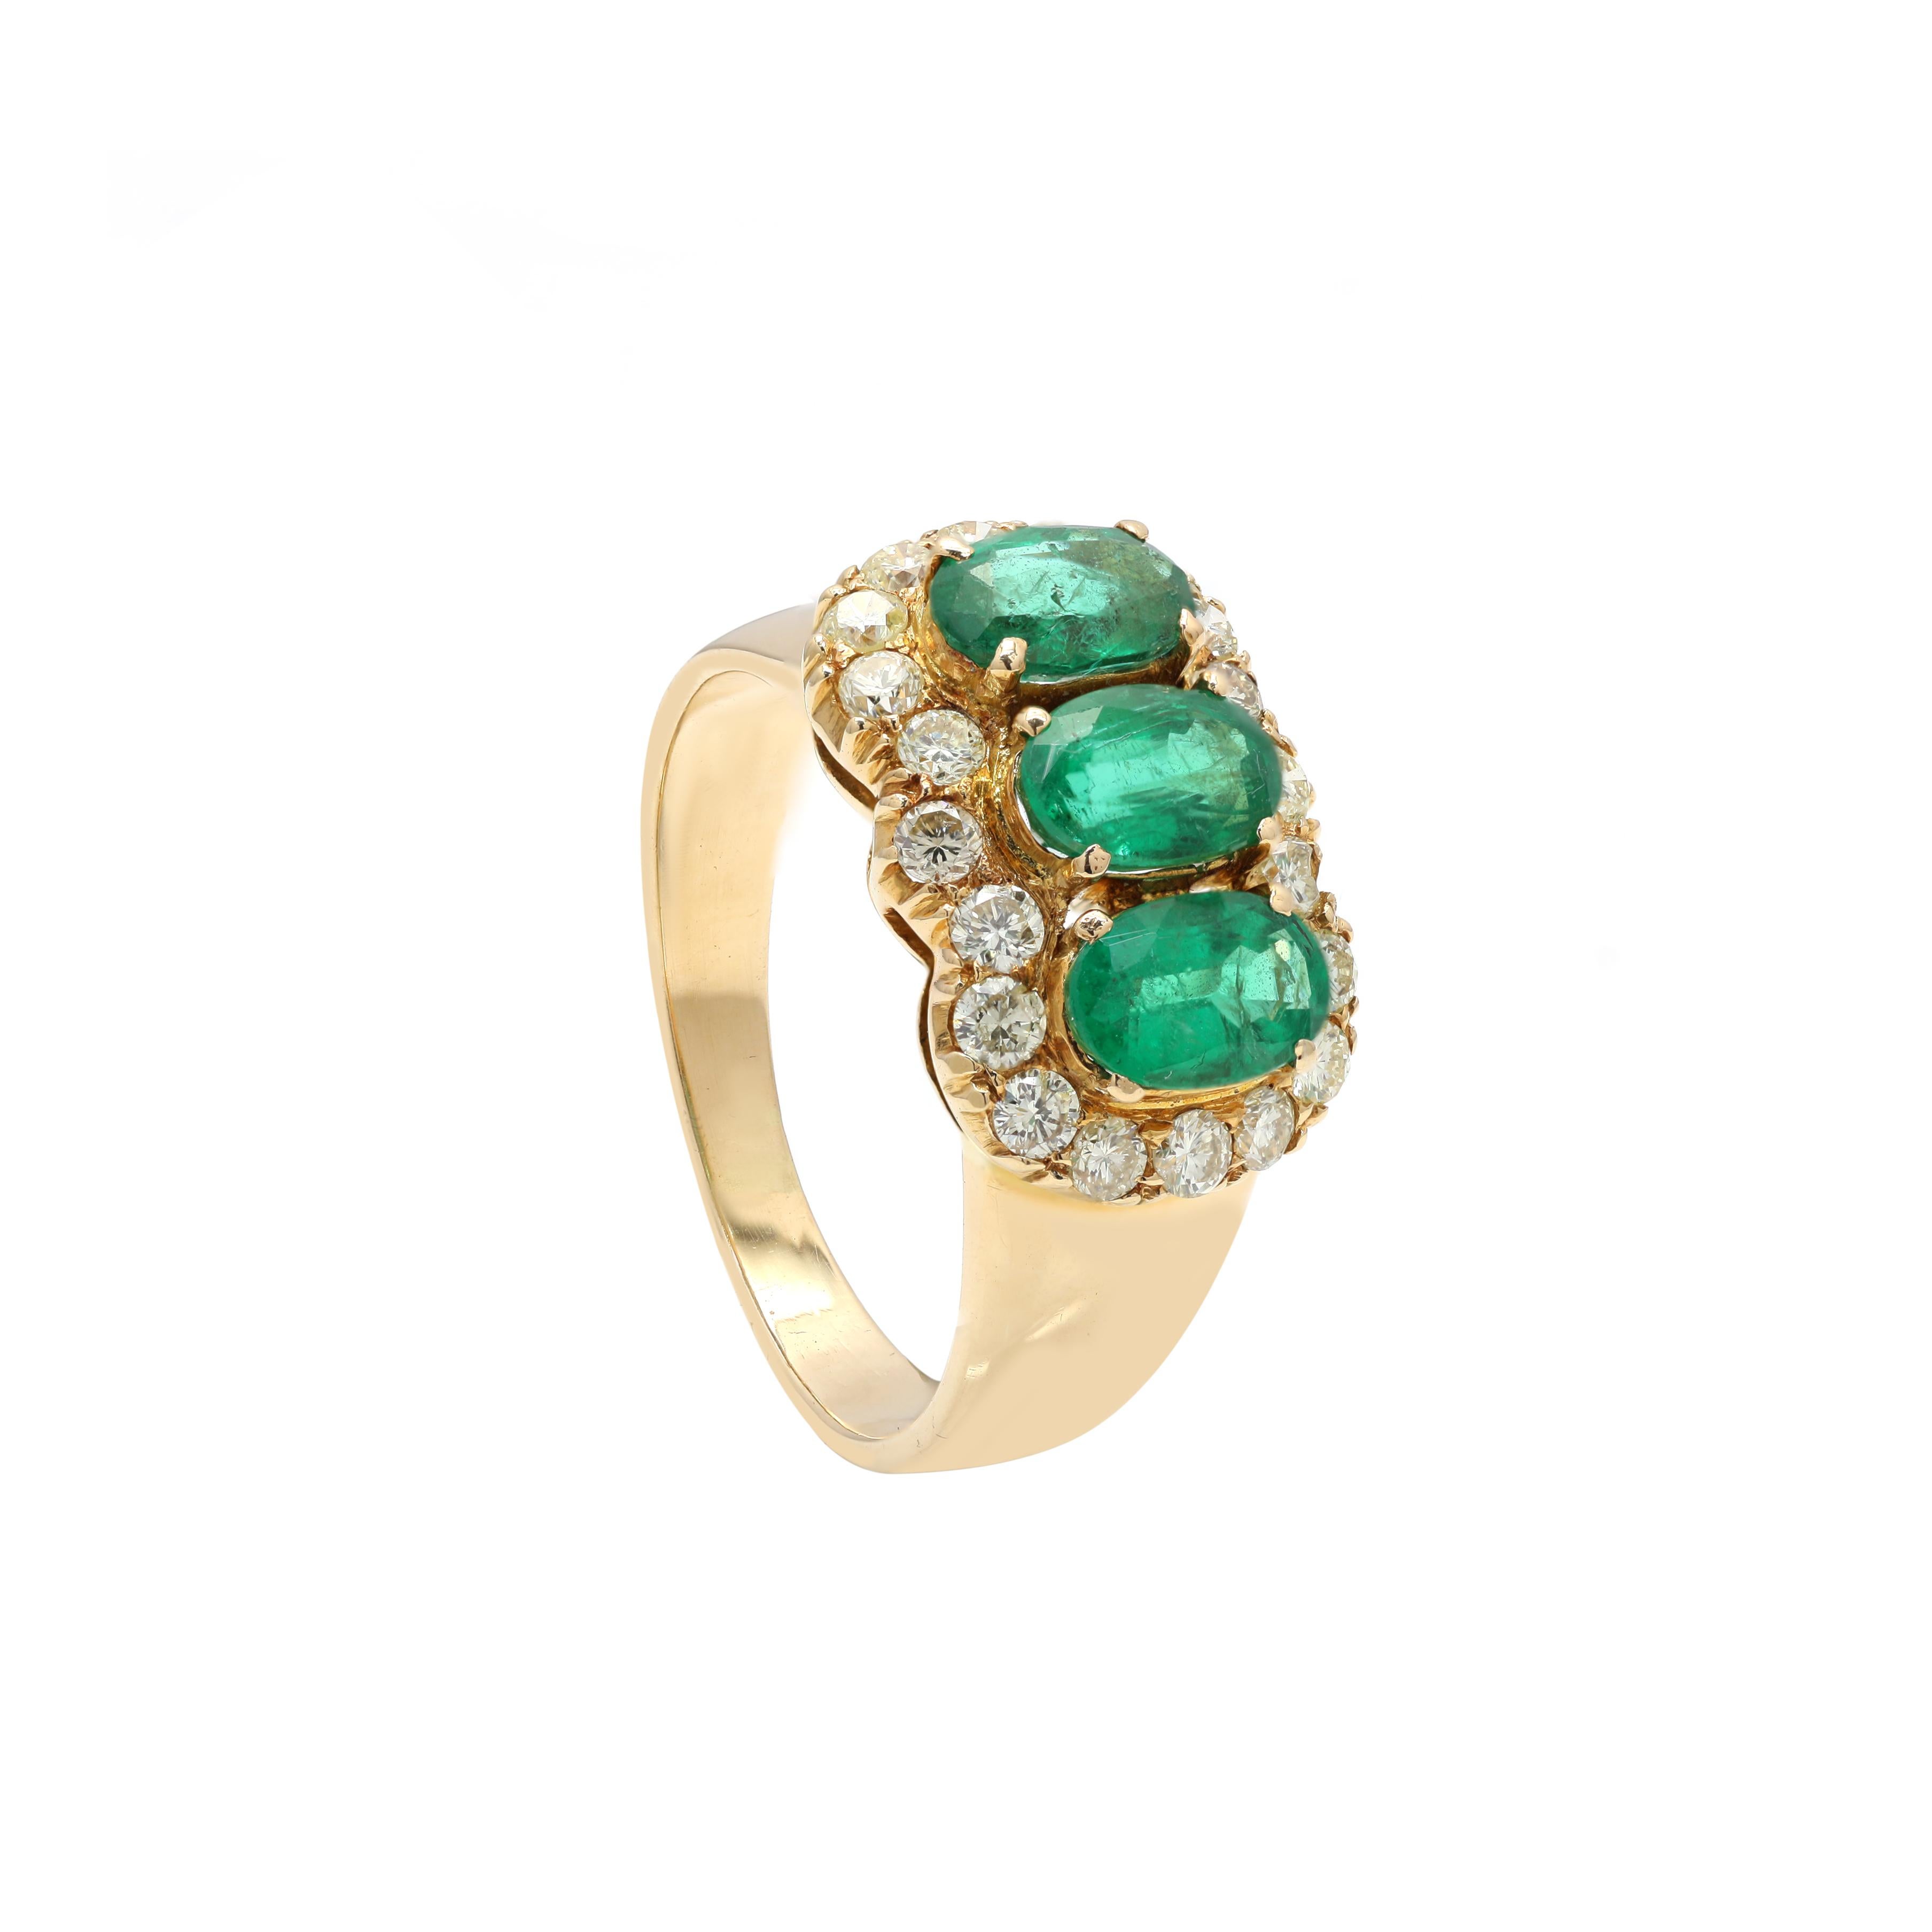 For Sale:  Estate 2.1 ct Oval Emerald Ring with Diamonds Encircling in 18 Karat Yellow Gold 2